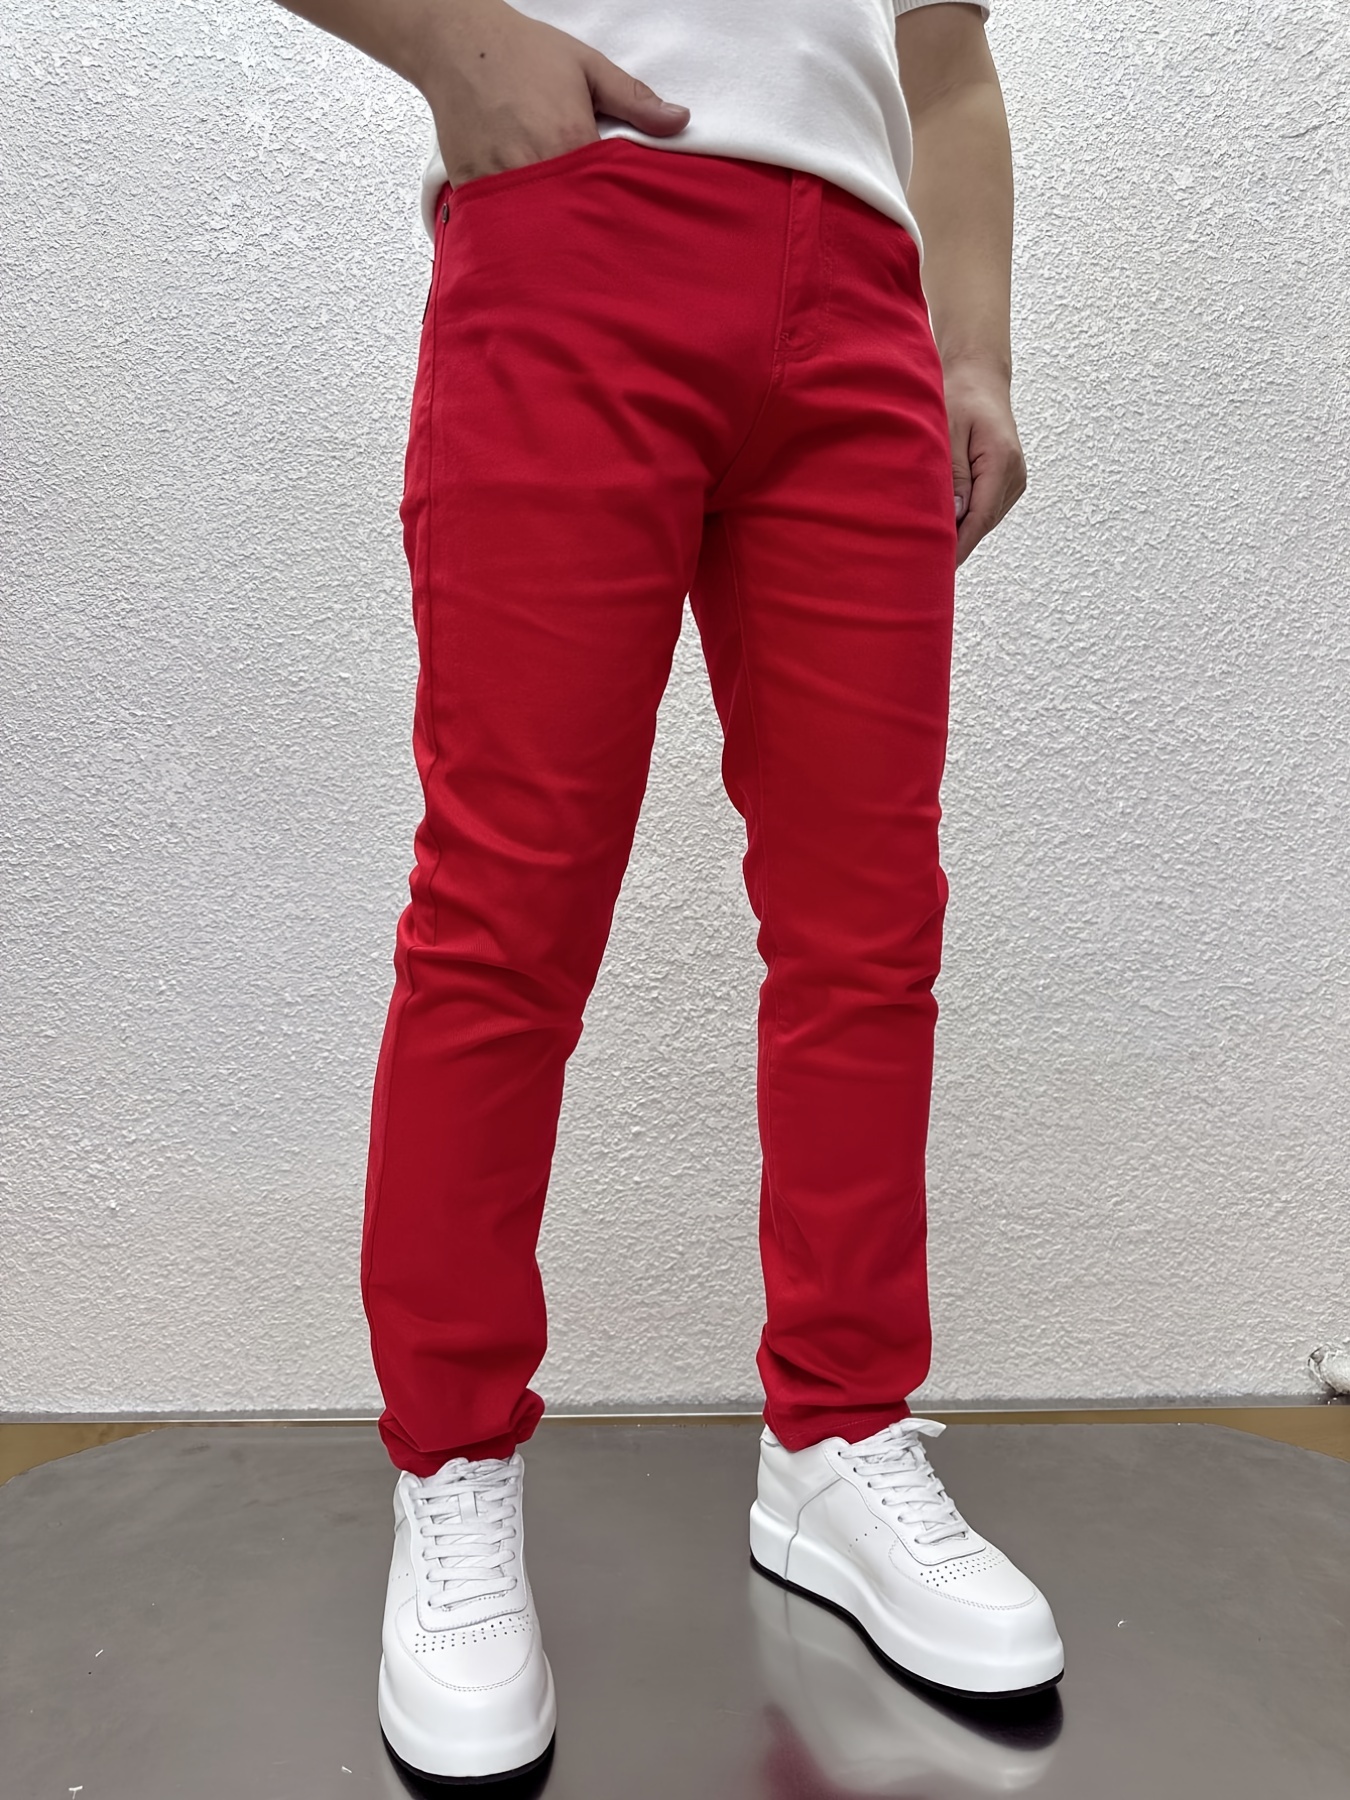 Men's Red Jeans Classic Style Straight Elasticity Cotton Denim Pants  Trousers Red